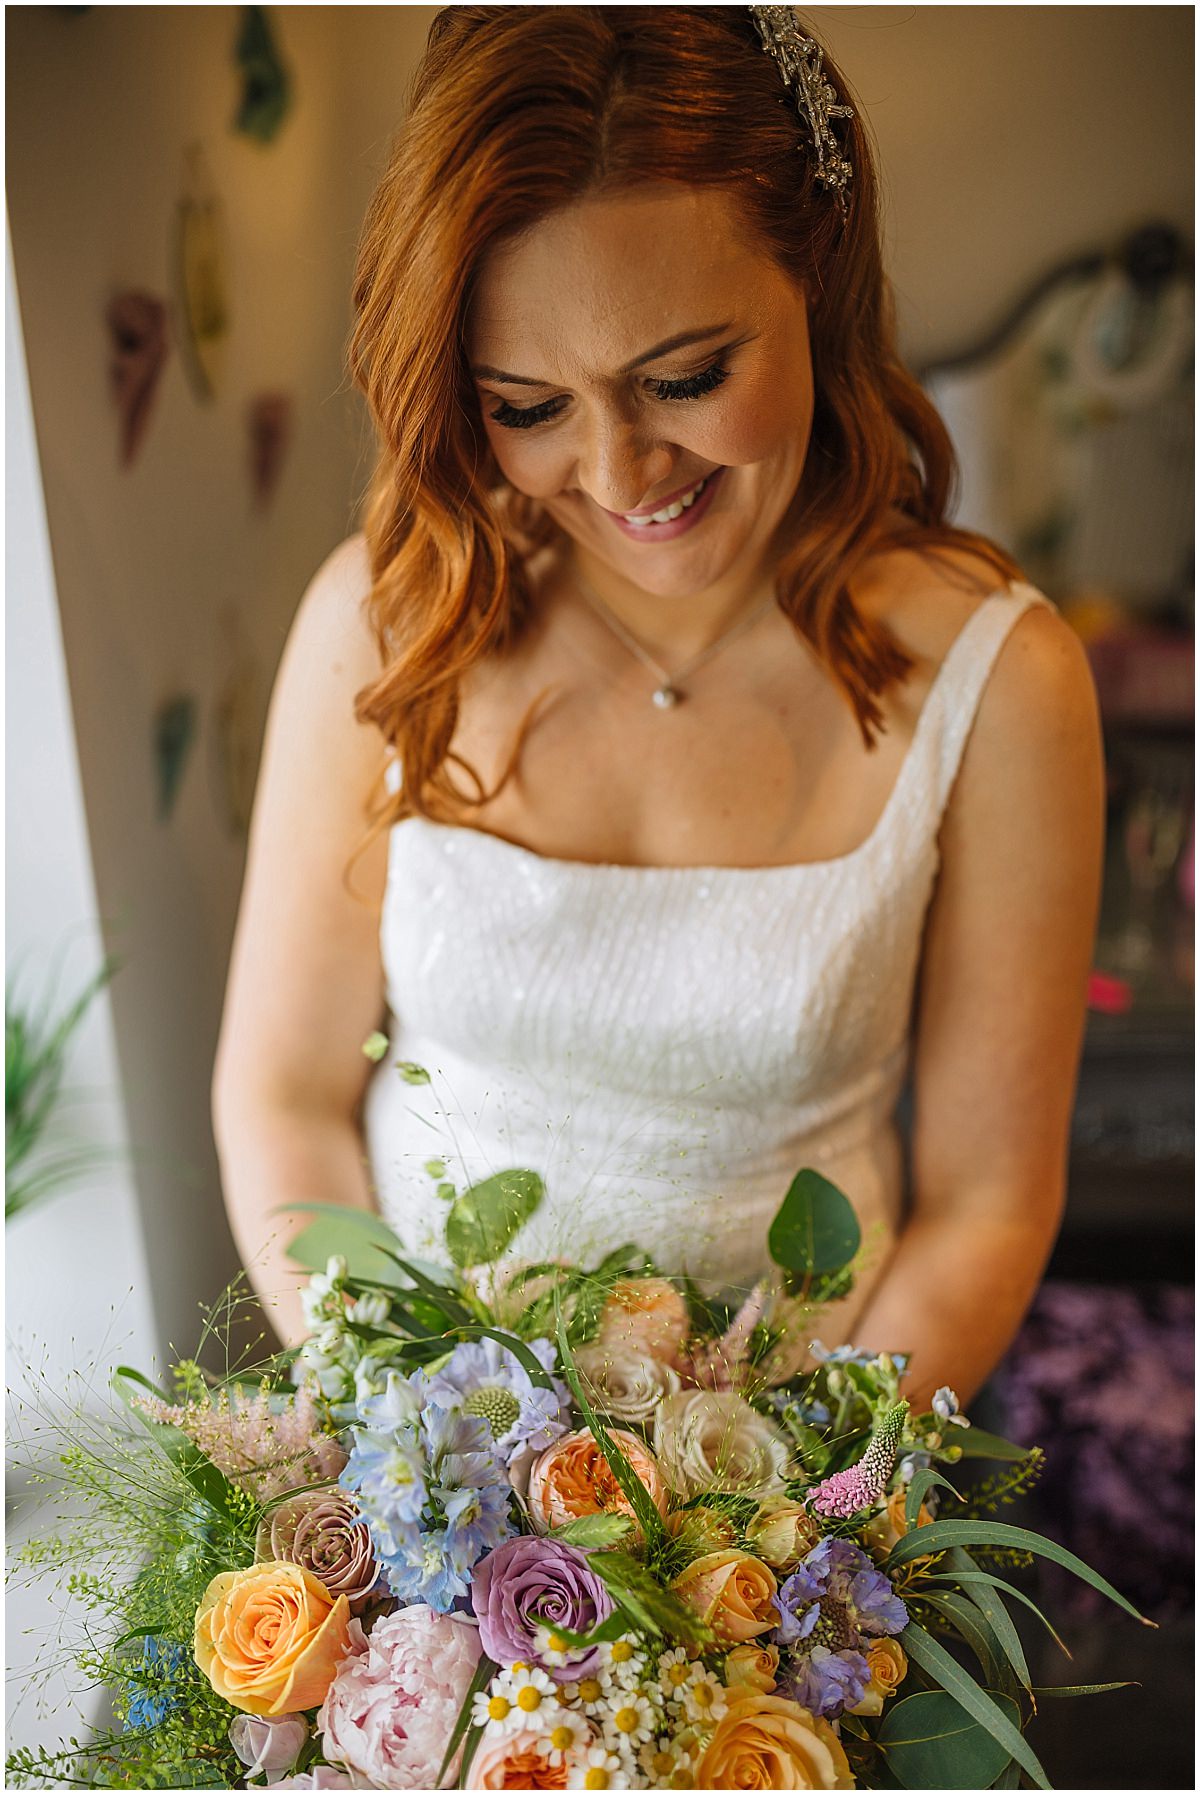 beautiful natural wedding photography at the wellbeing farm